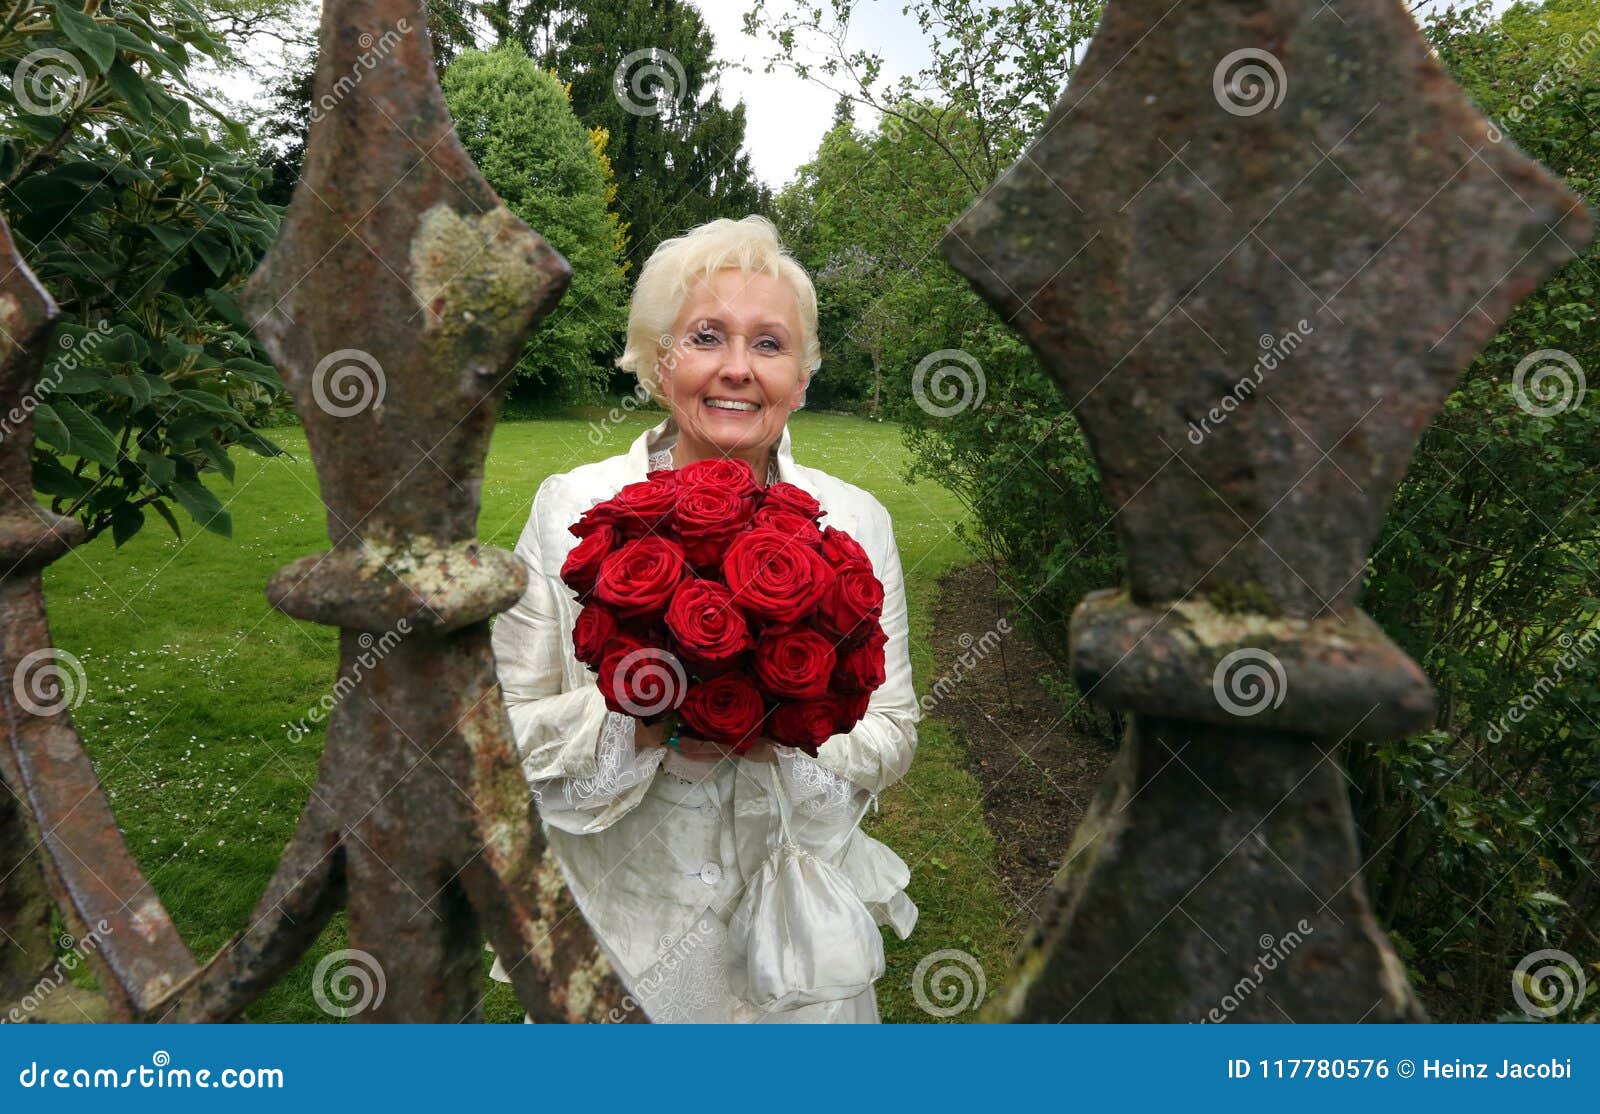 happy bride with red roses photographed through the old castle fence